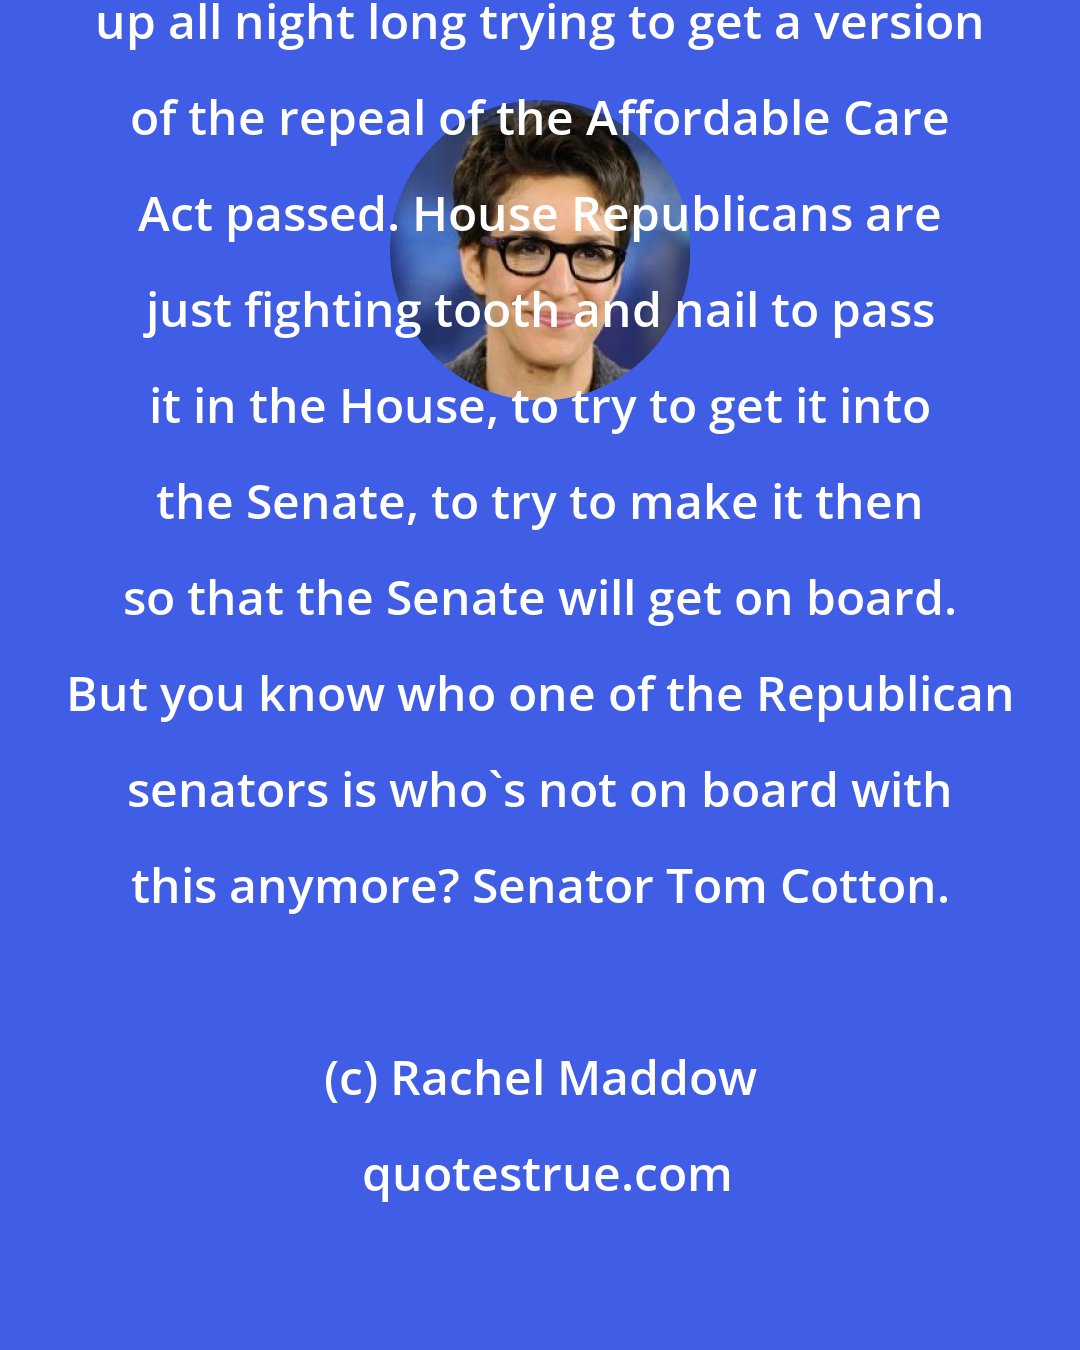 Rachel Maddow: Two committees in the house were up all night long trying to get a version of the repeal of the Affordable Care Act passed. House Republicans are just fighting tooth and nail to pass it in the House, to try to get it into the Senate, to try to make it then so that the Senate will get on board. But you know who one of the Republican senators is who`s not on board with this anymore? Senator Tom Cotton.